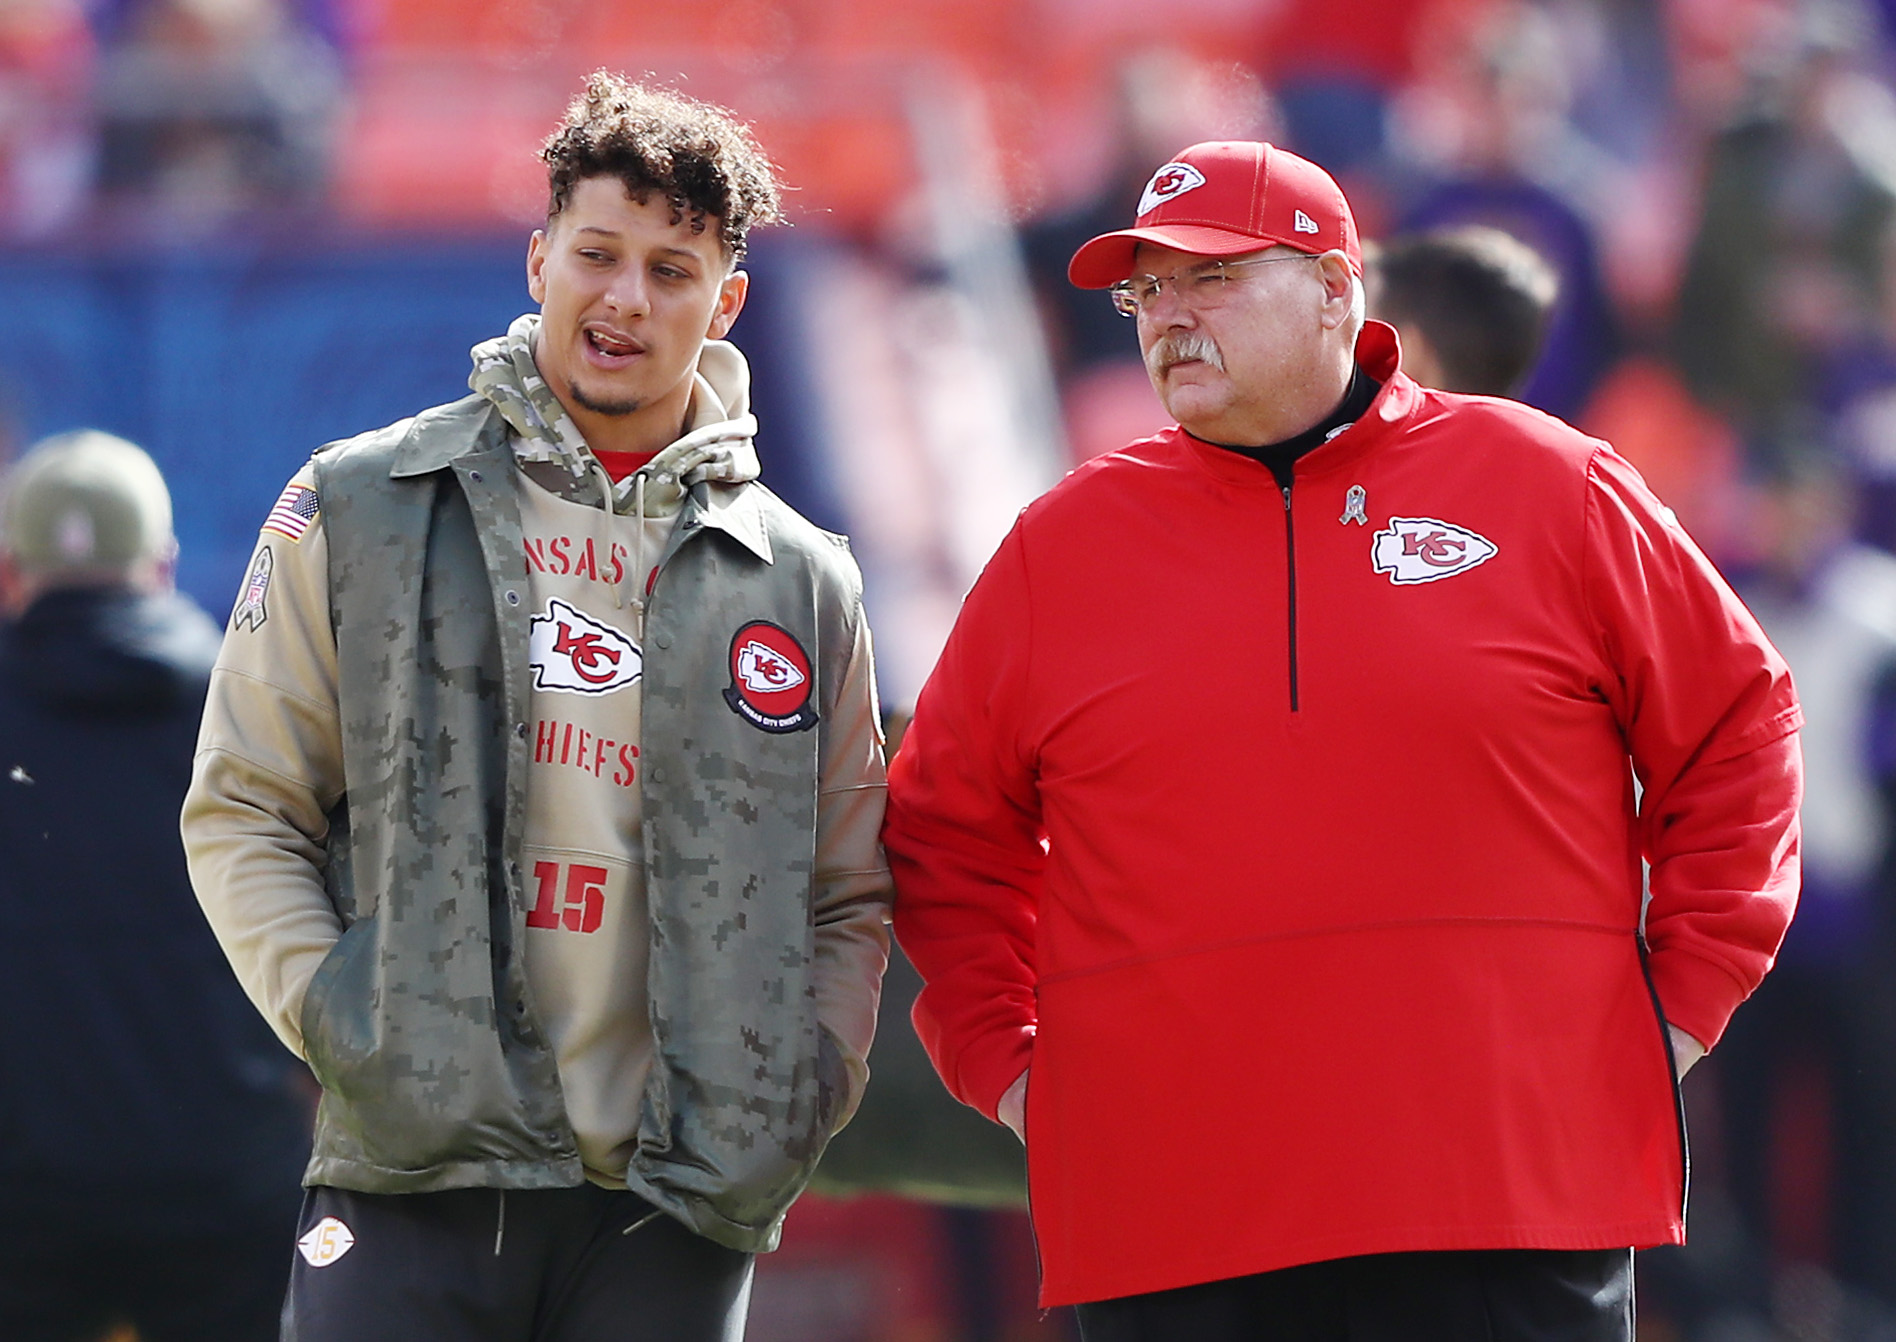 Andy Reid is ready to spend the next decade working with Patrick Mahomes.